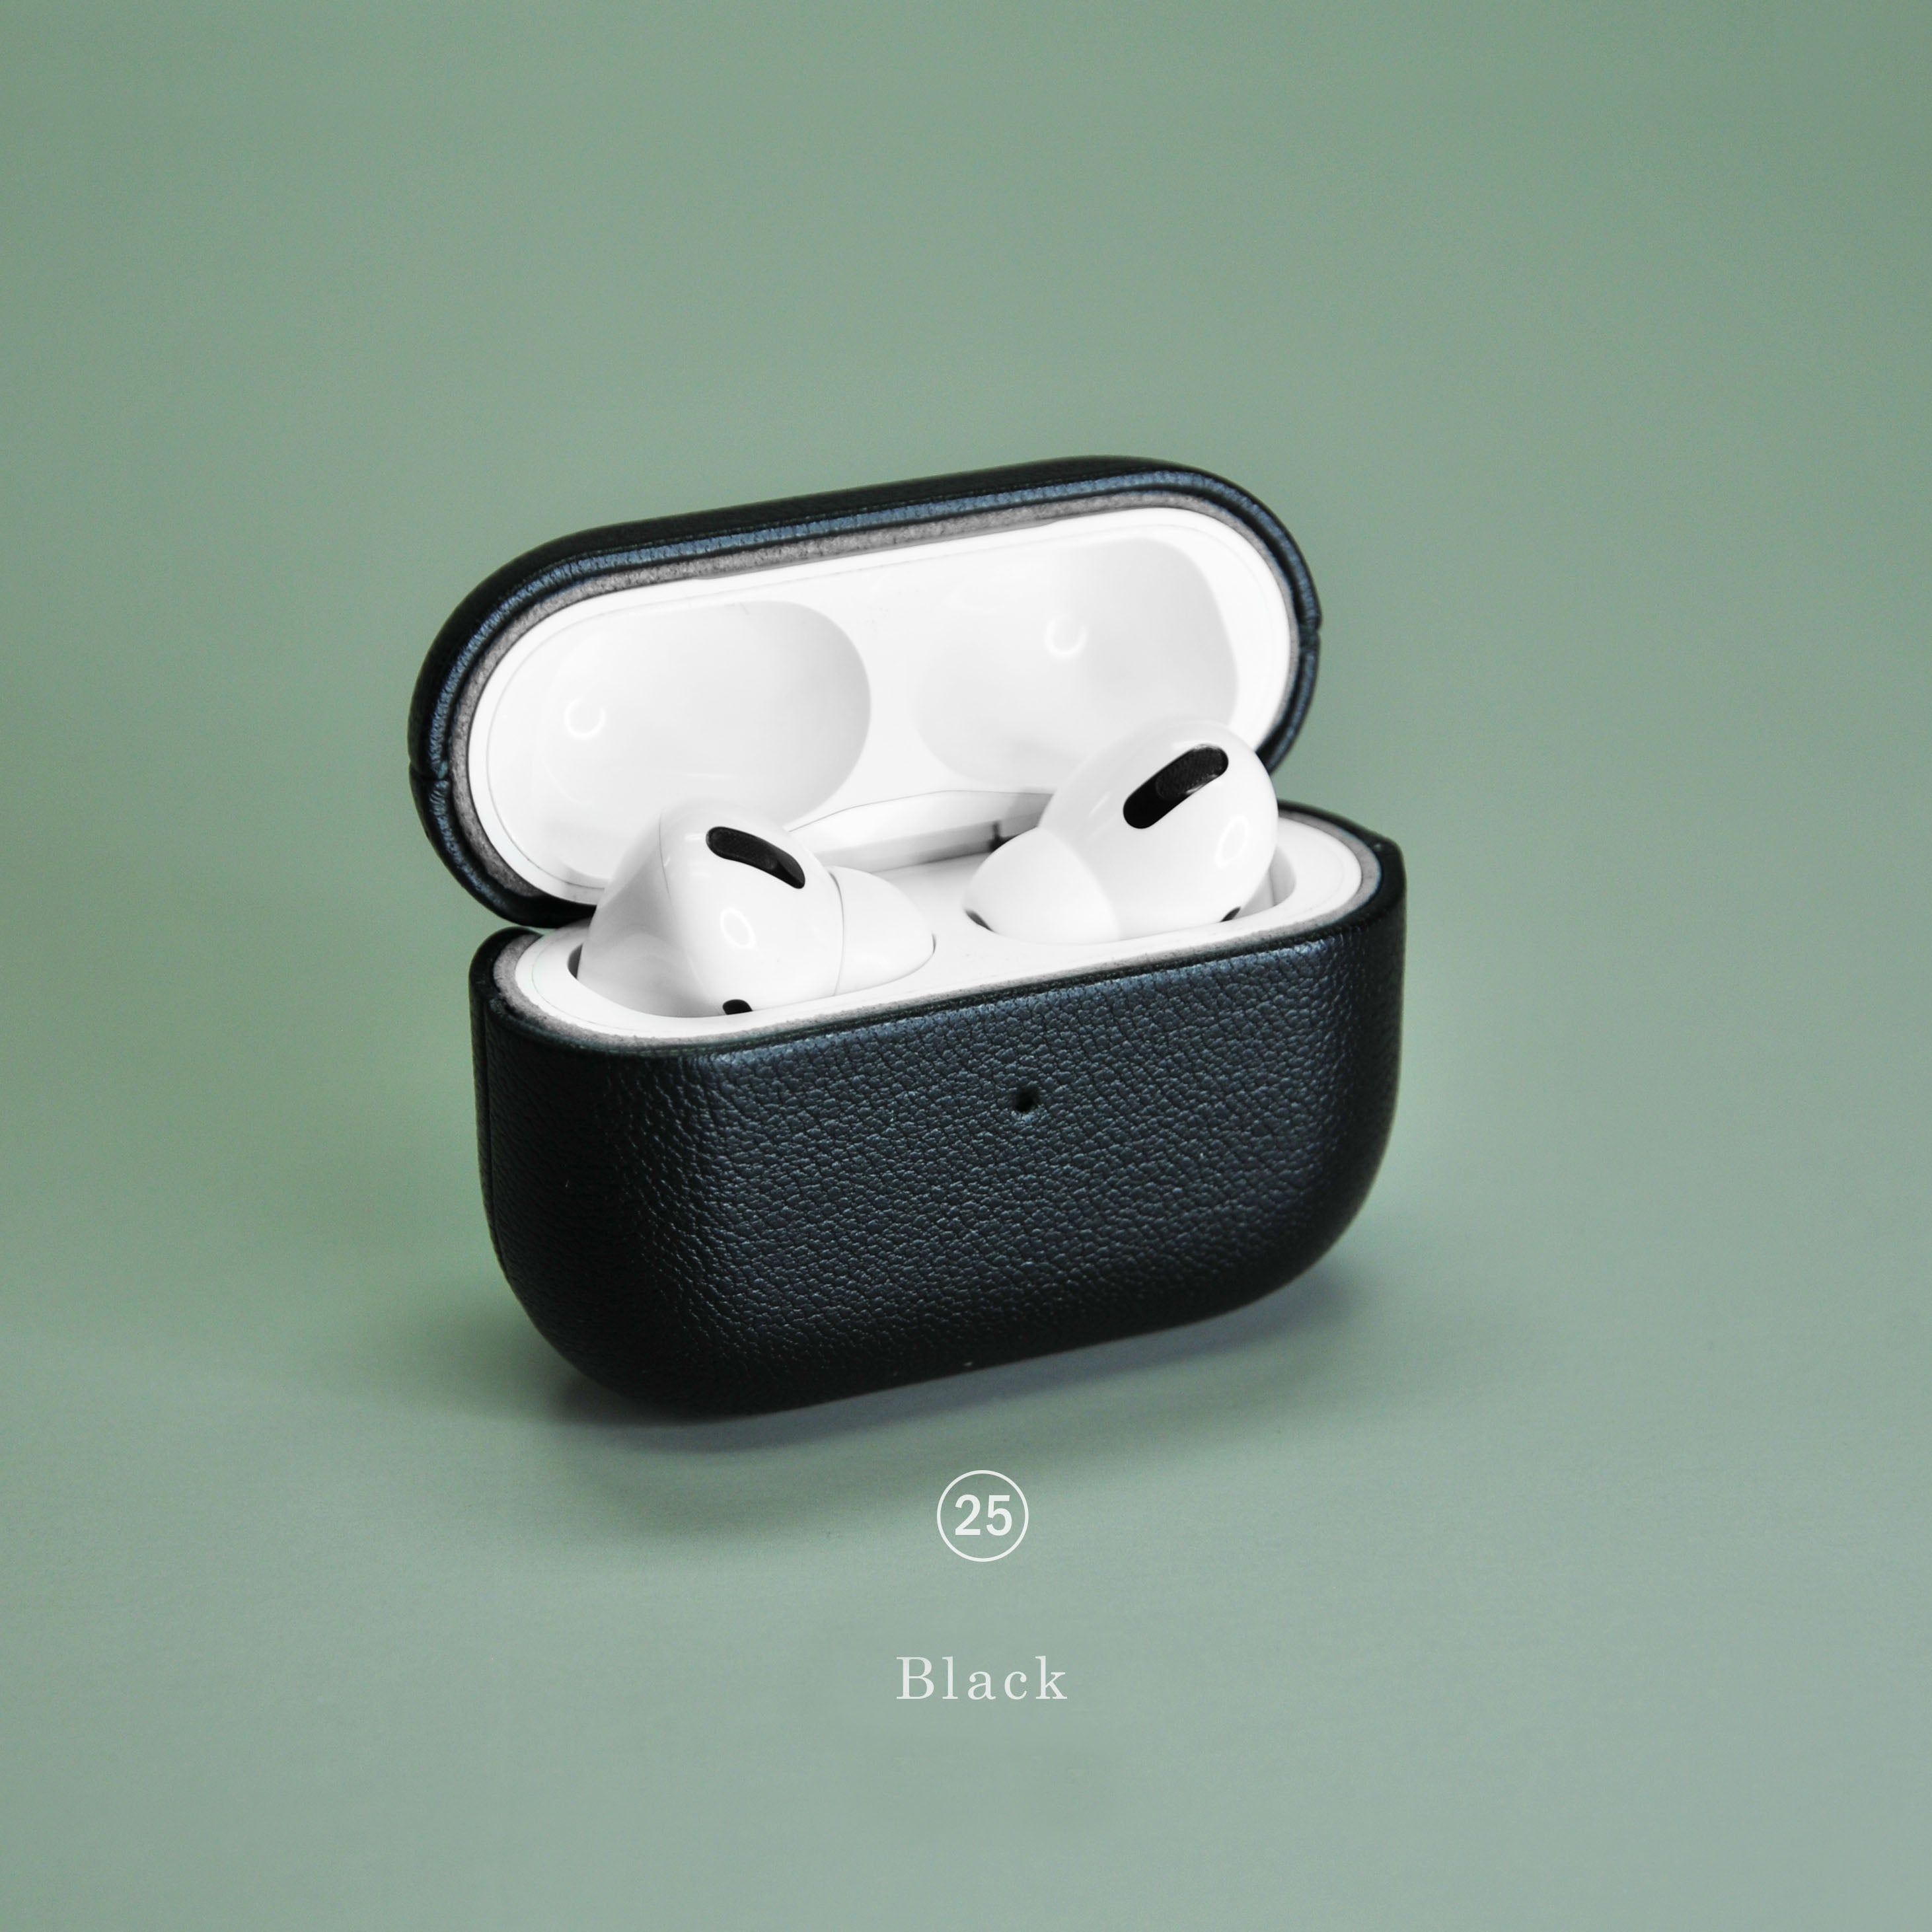 Black Leather AirPod Case